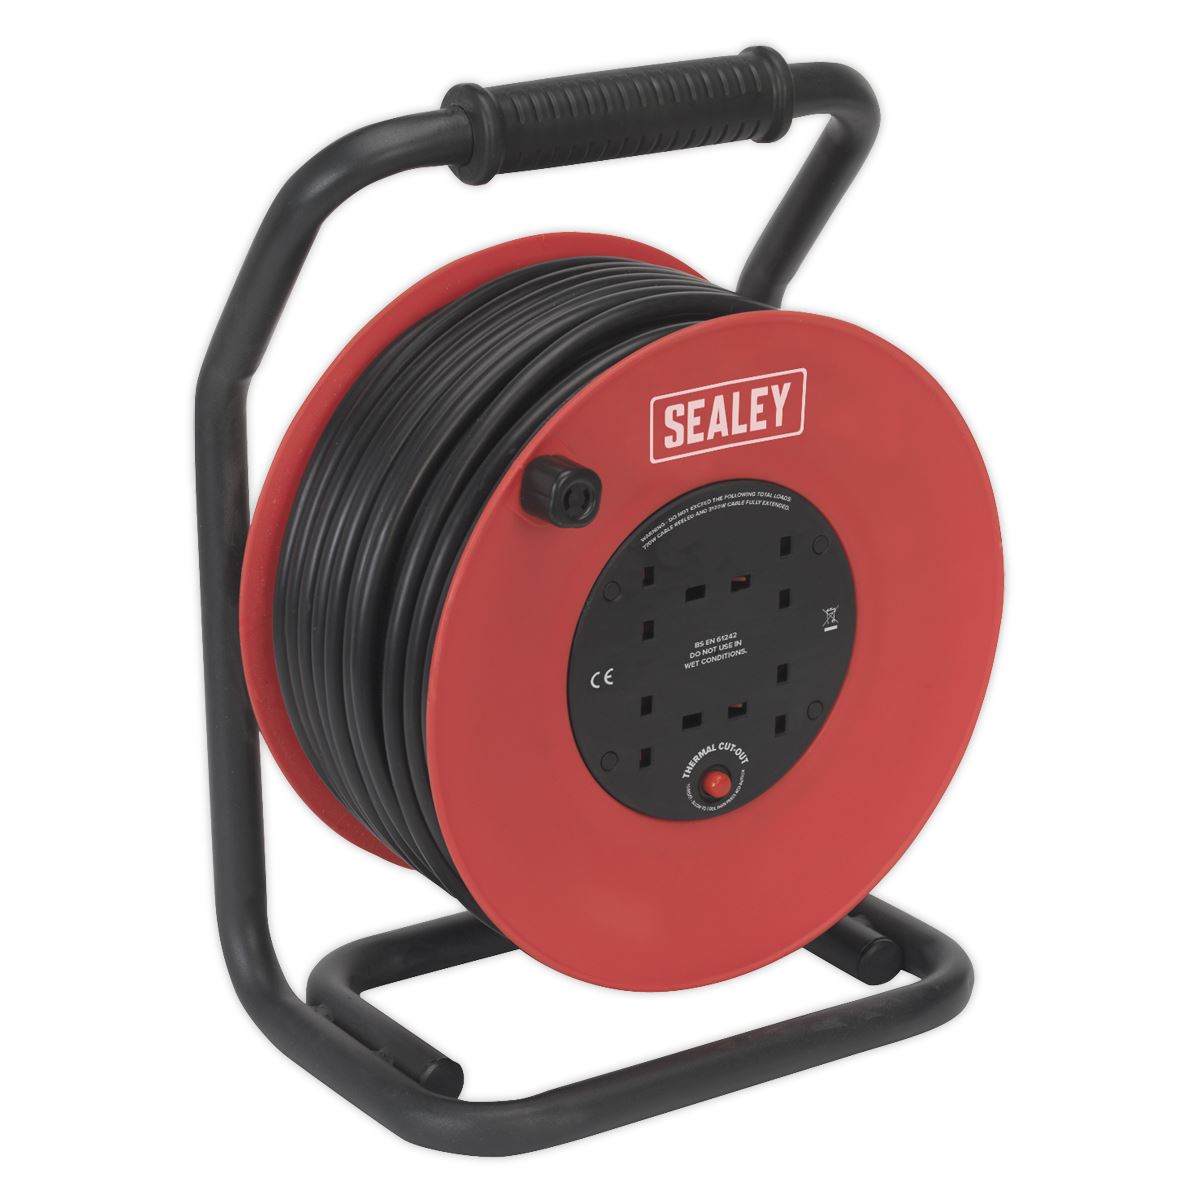 Sealey Cable Reel 50m 4 x 230V 2.5mm² Heavy-Duty Thermal Trip